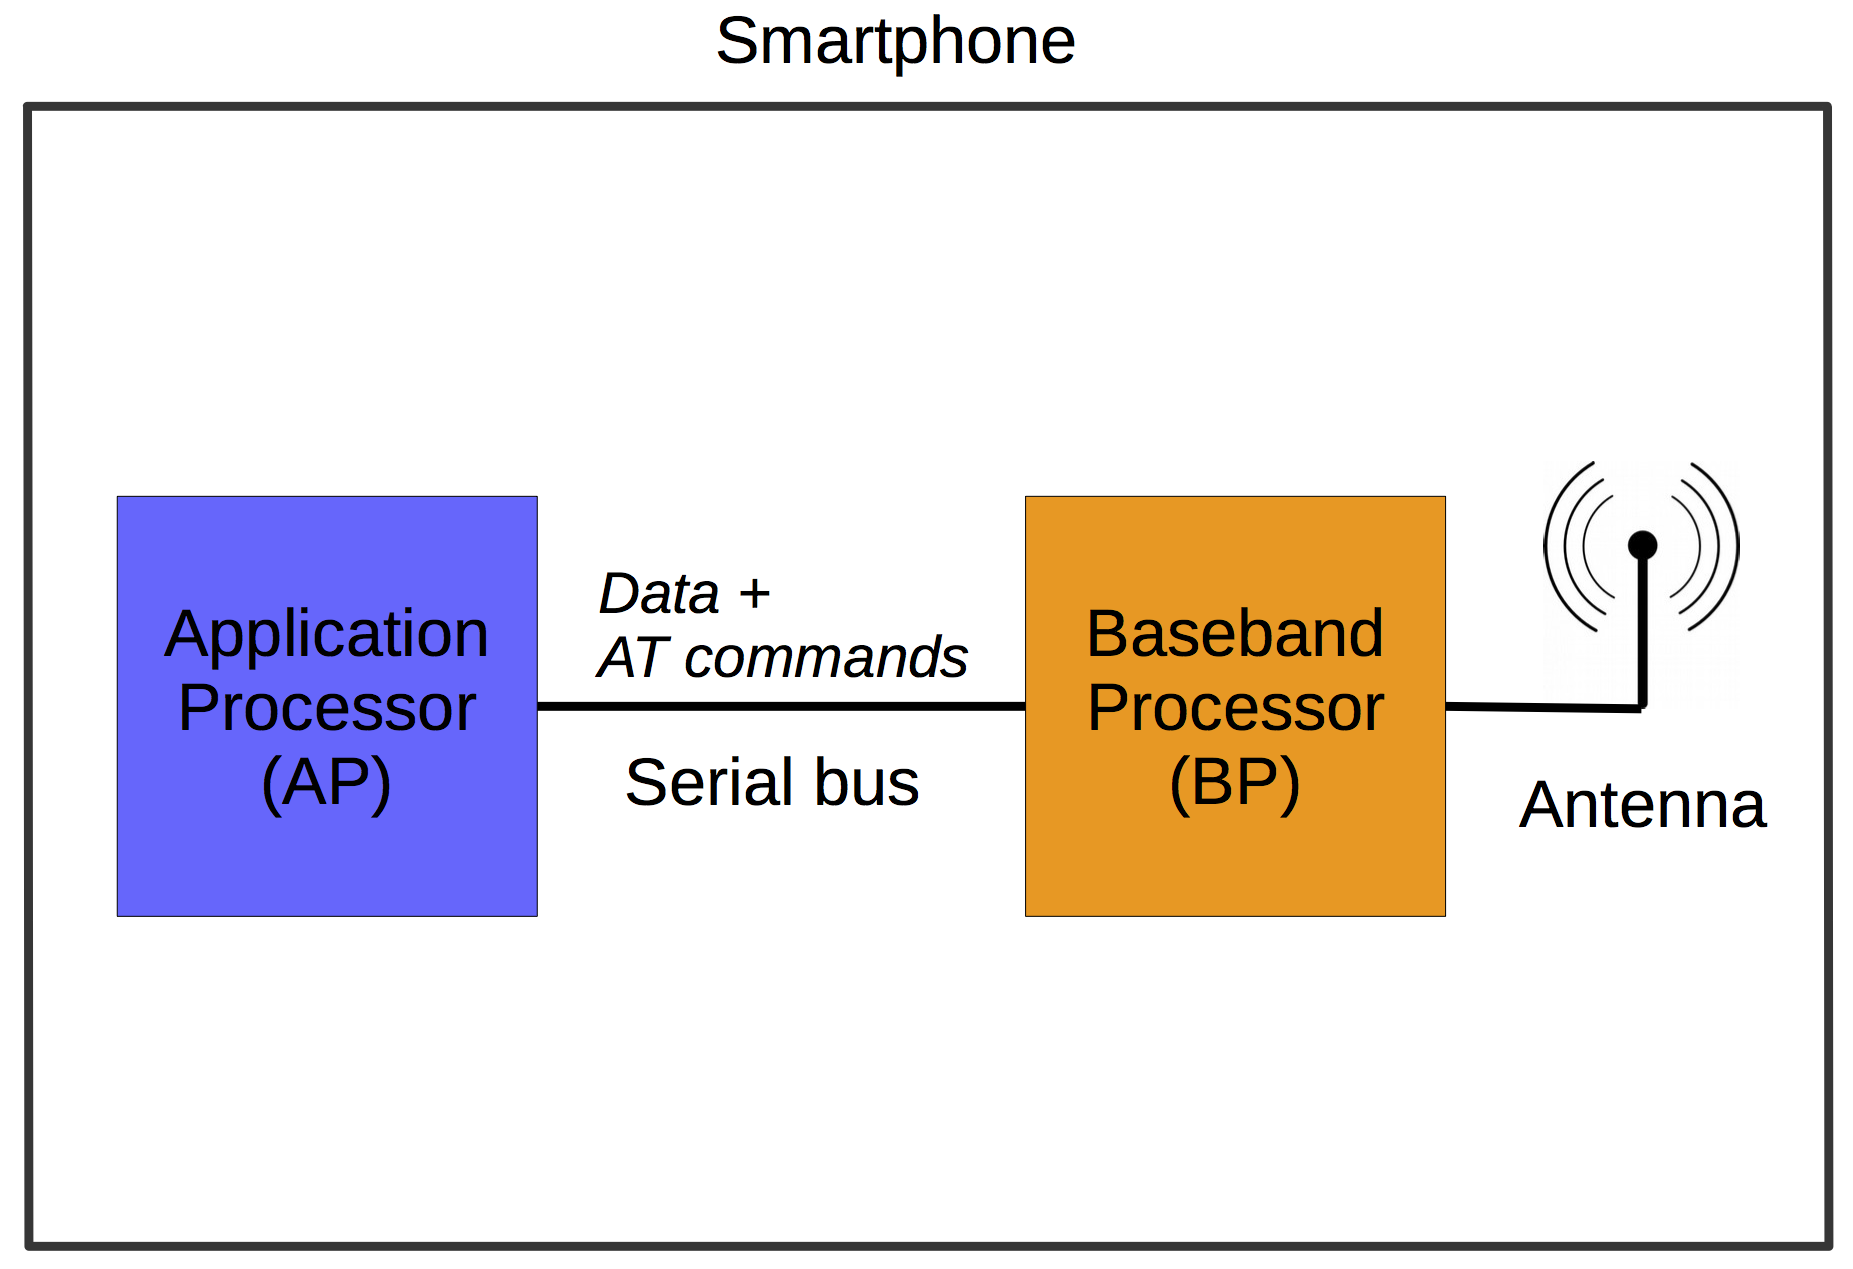 General smartphone architecture including a dedicated application processor (AP) and baseband processor (BP)